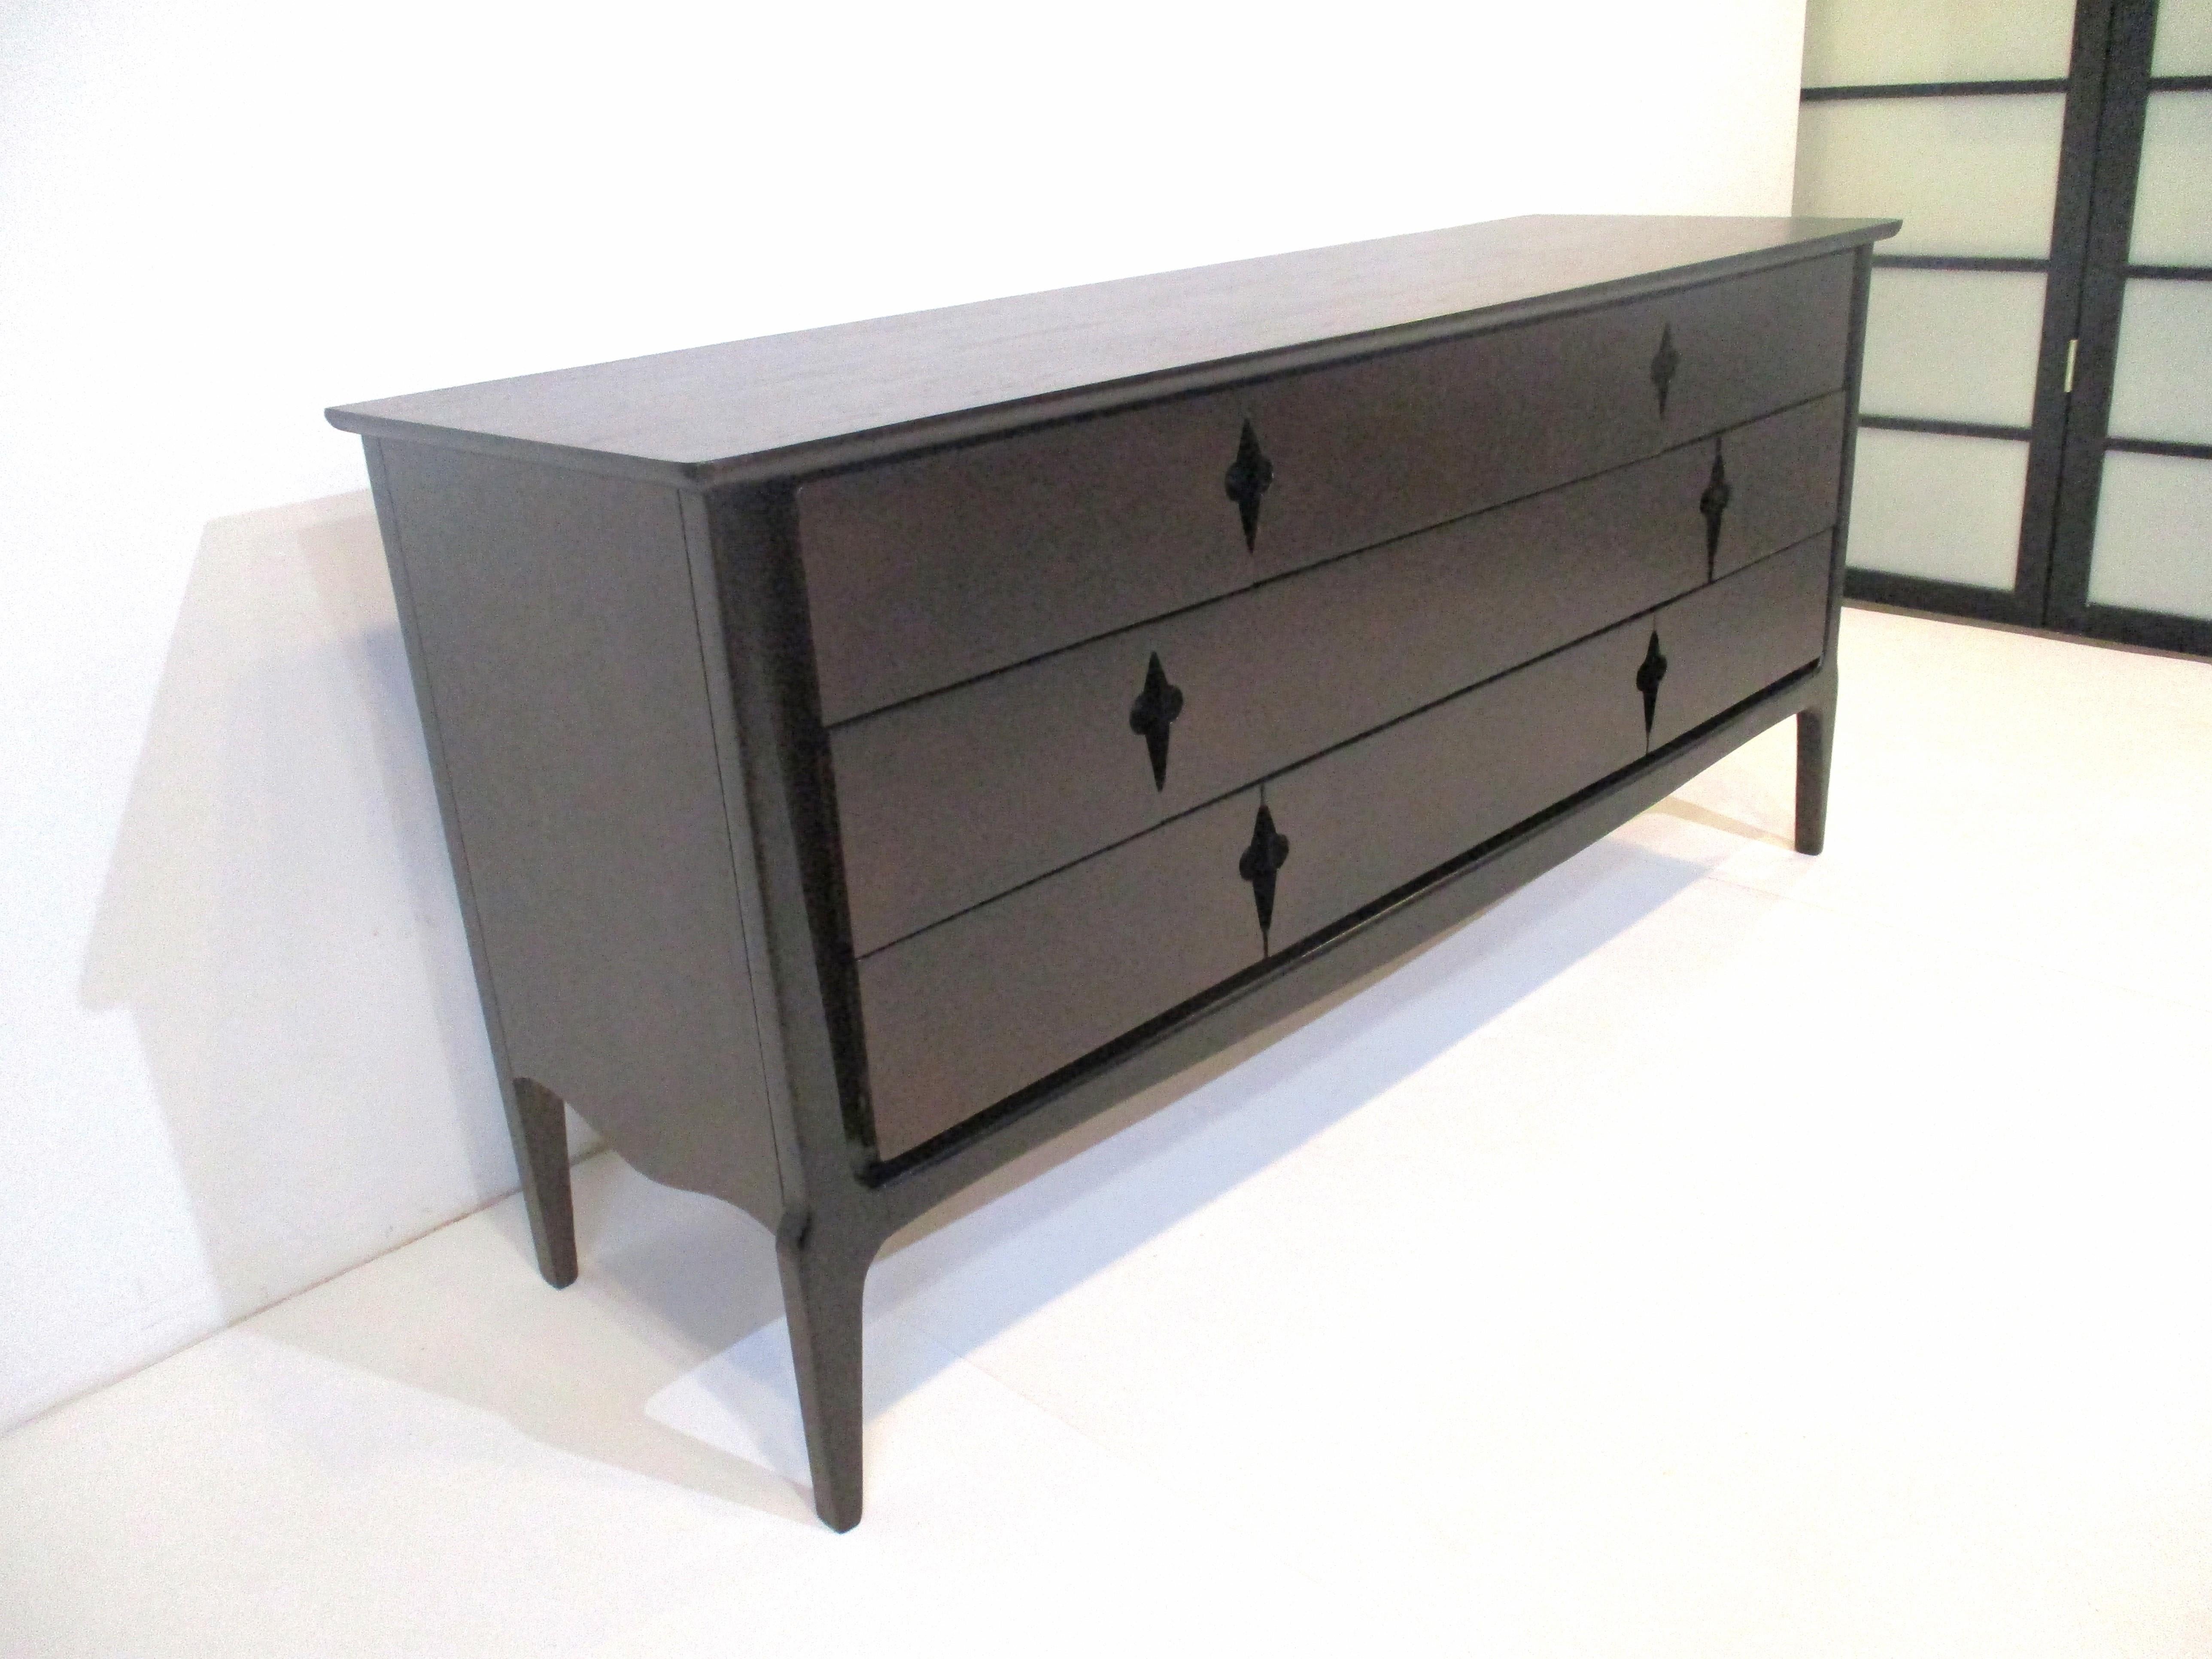 A ebony finished walnut nine drawer dresser chest with darker contrasting wood frame giving the piece a rich feel . The drawers have a midcentury de-lis fleur styled design as pulls , with tons of storage manufactured by the United Furniture company.